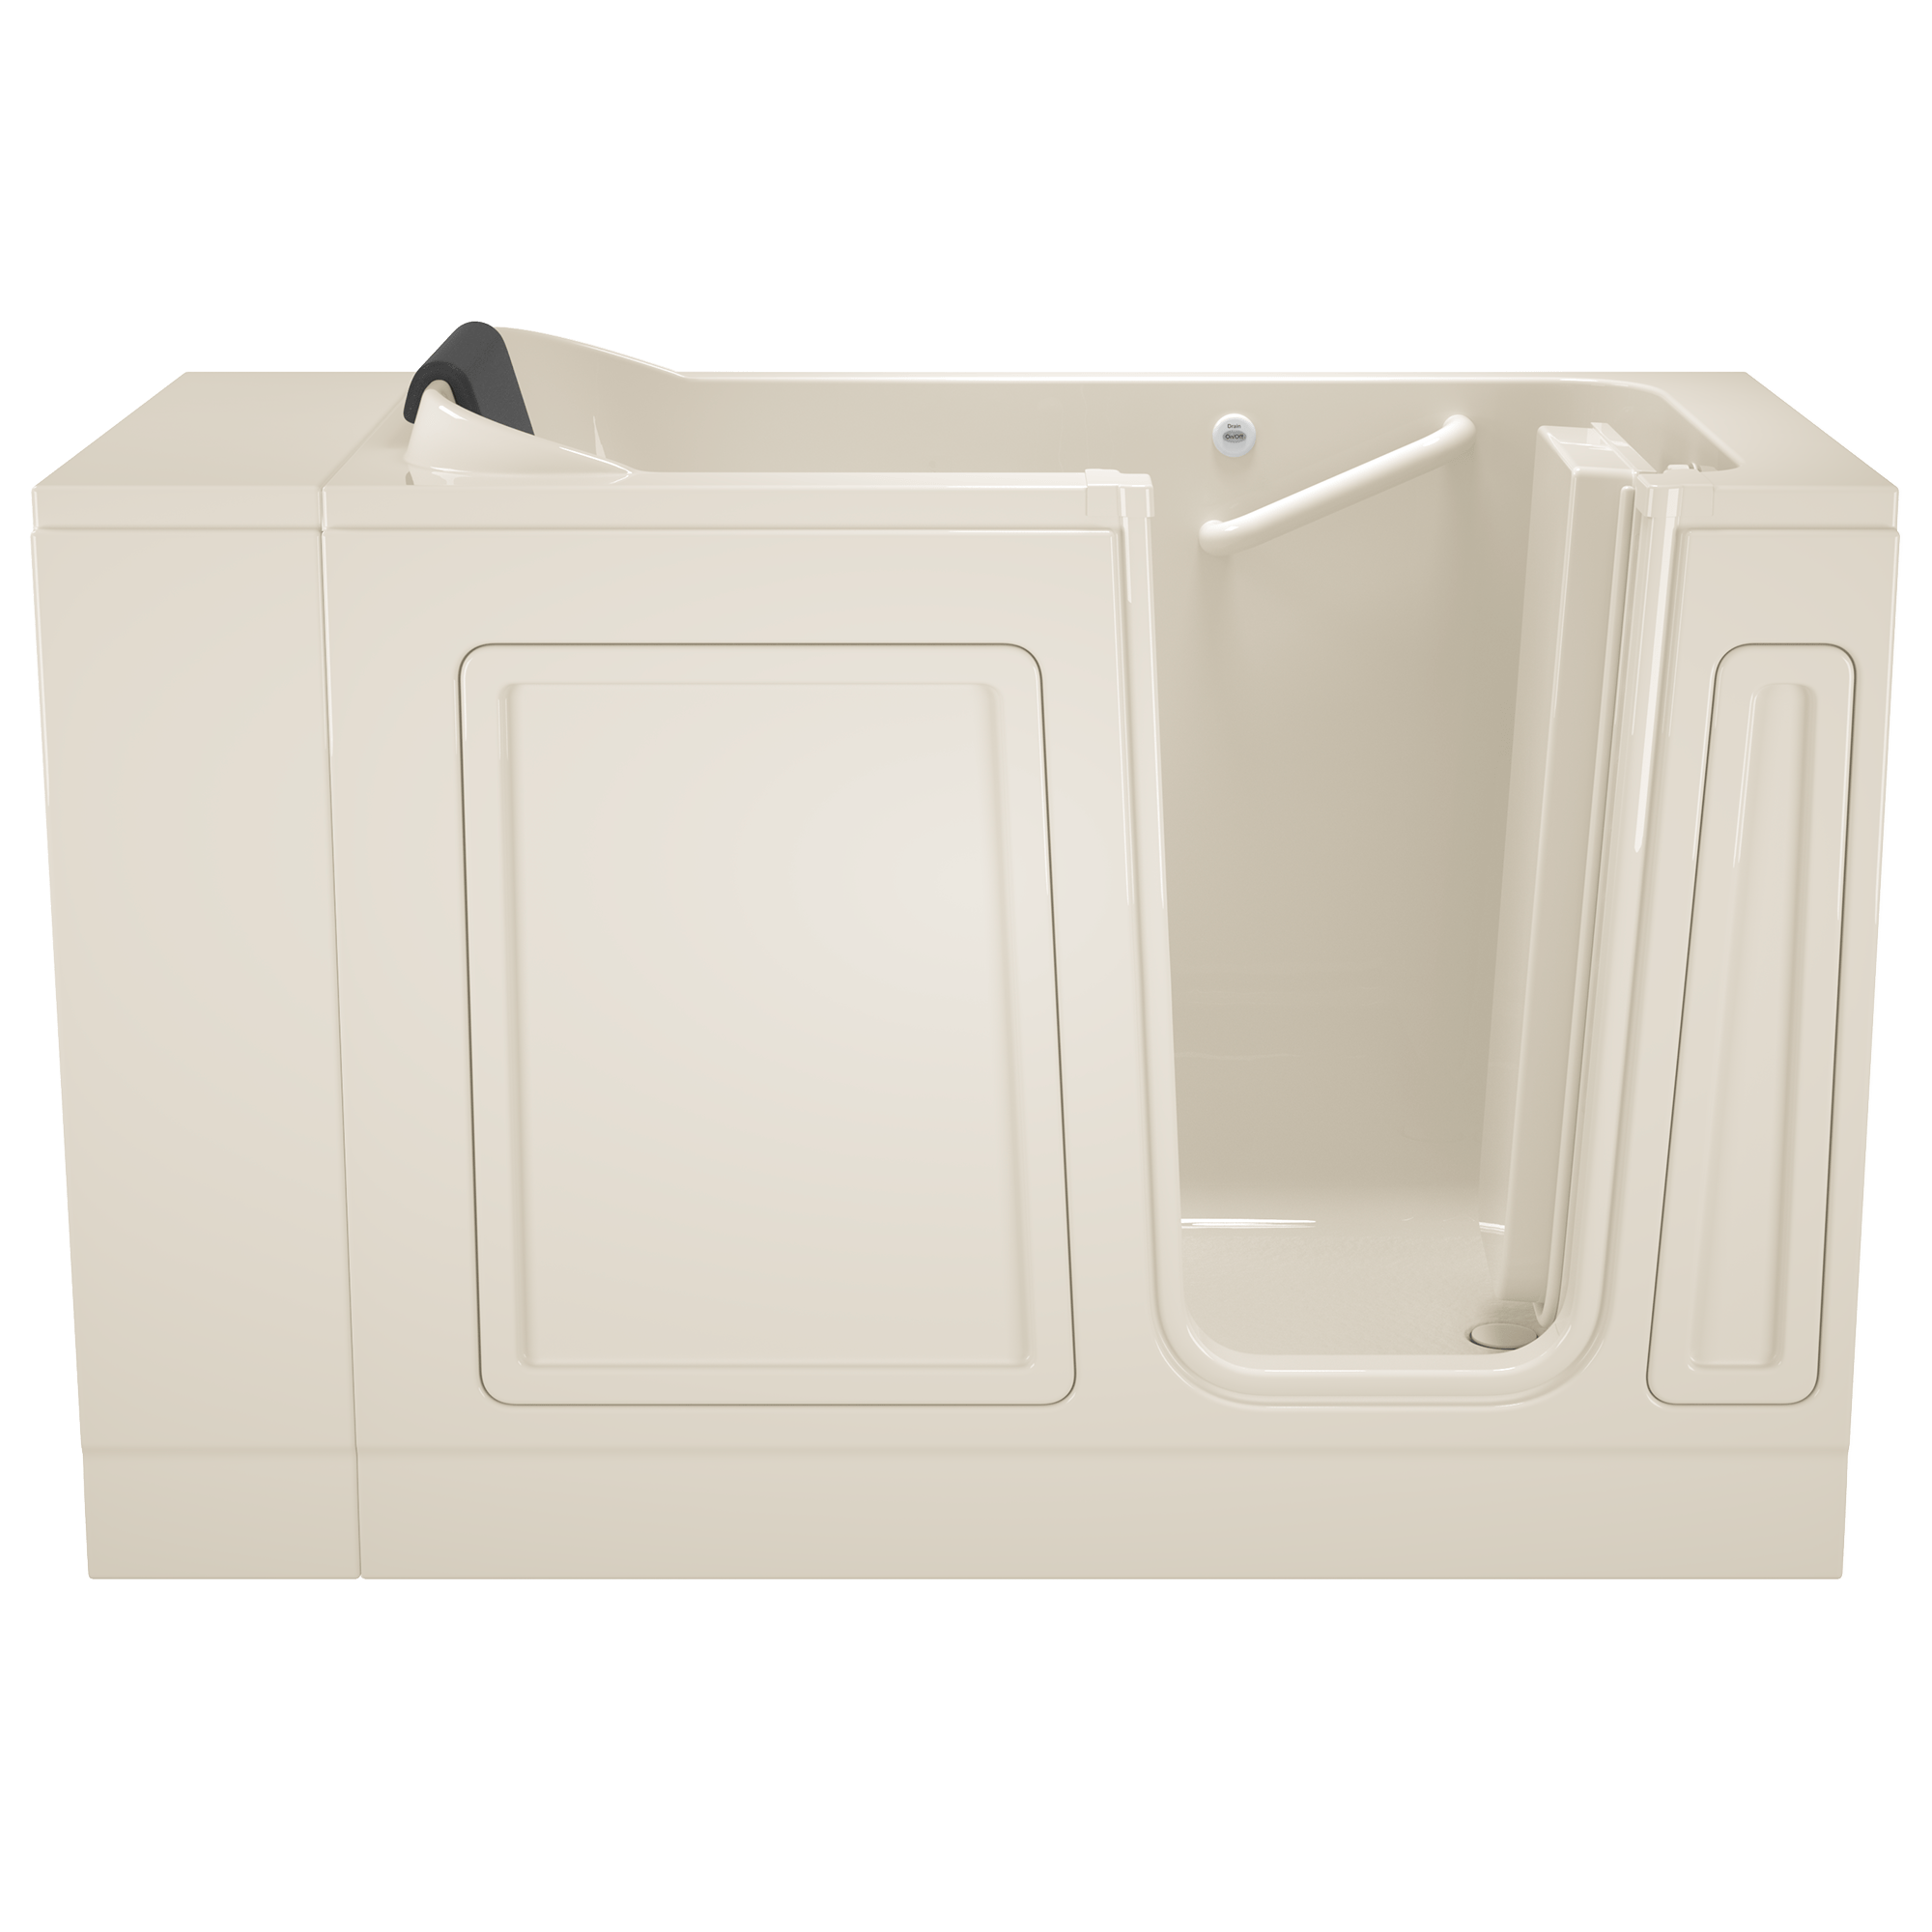 Acrylic Luxury Series 28 x 48-Inch Walk-in Tub With Soaker System - Right-Hand Drain